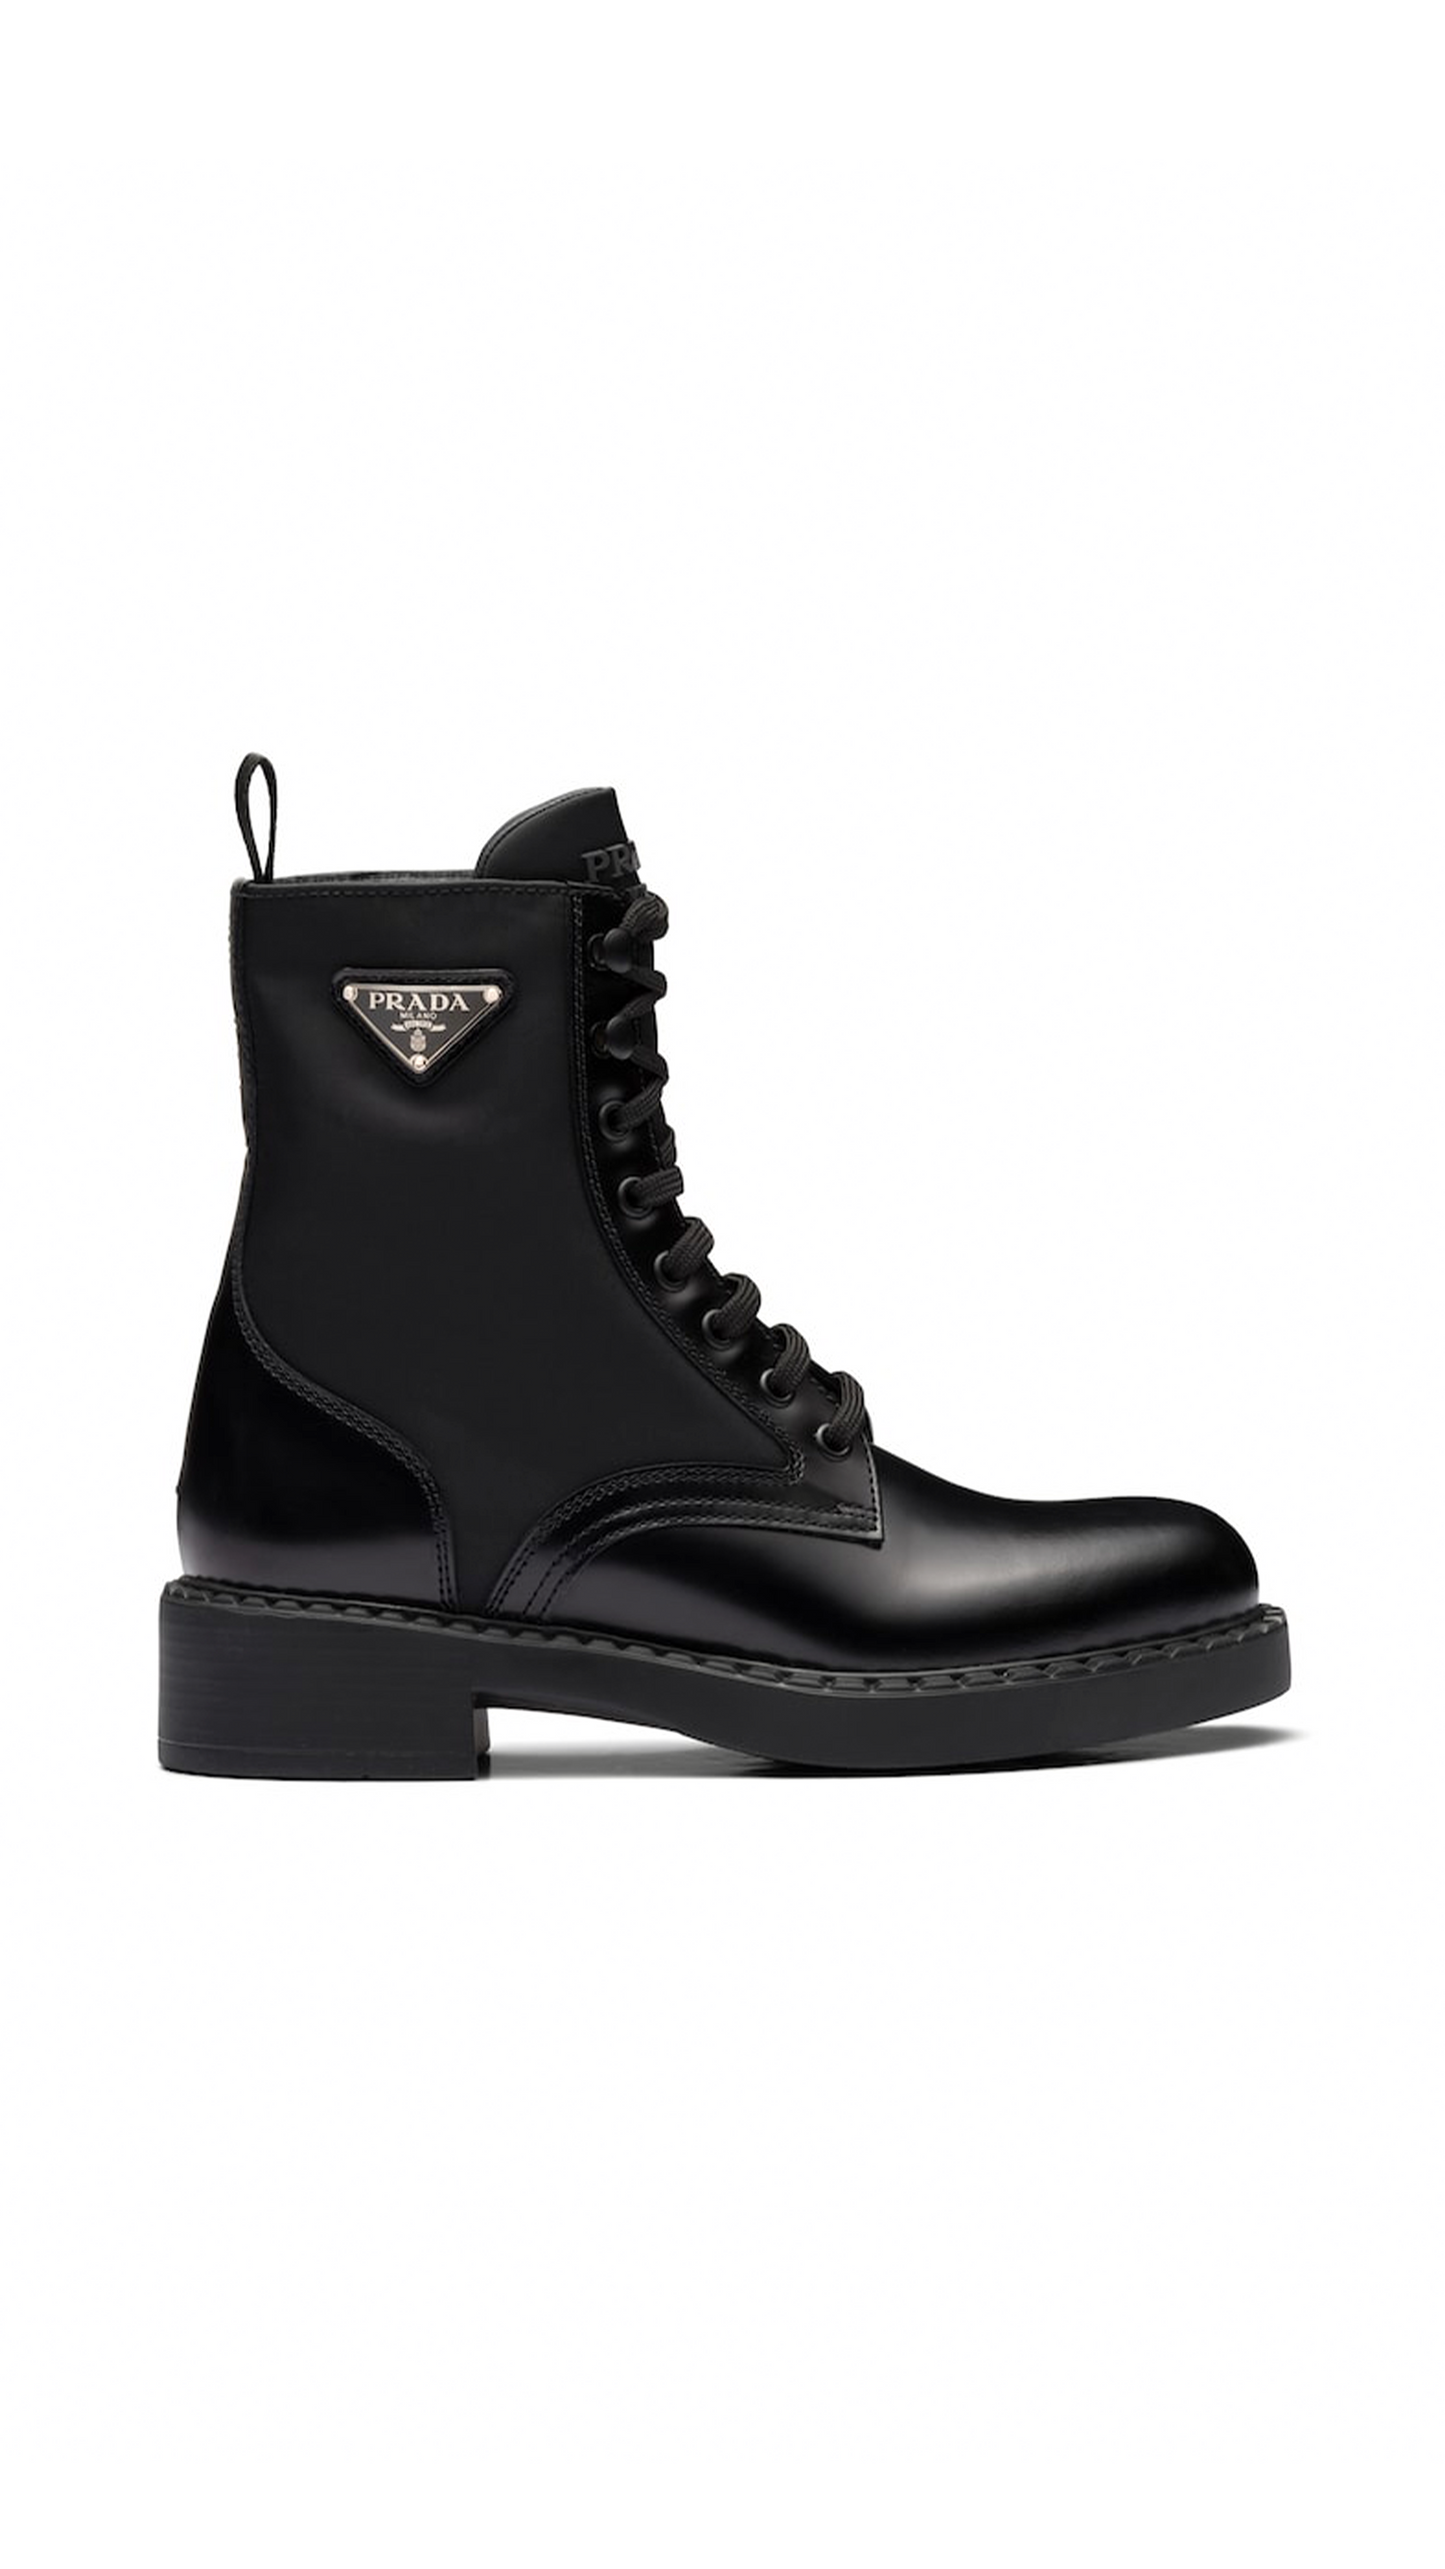 Brushed Leather and Re-Nylon Boots - Black